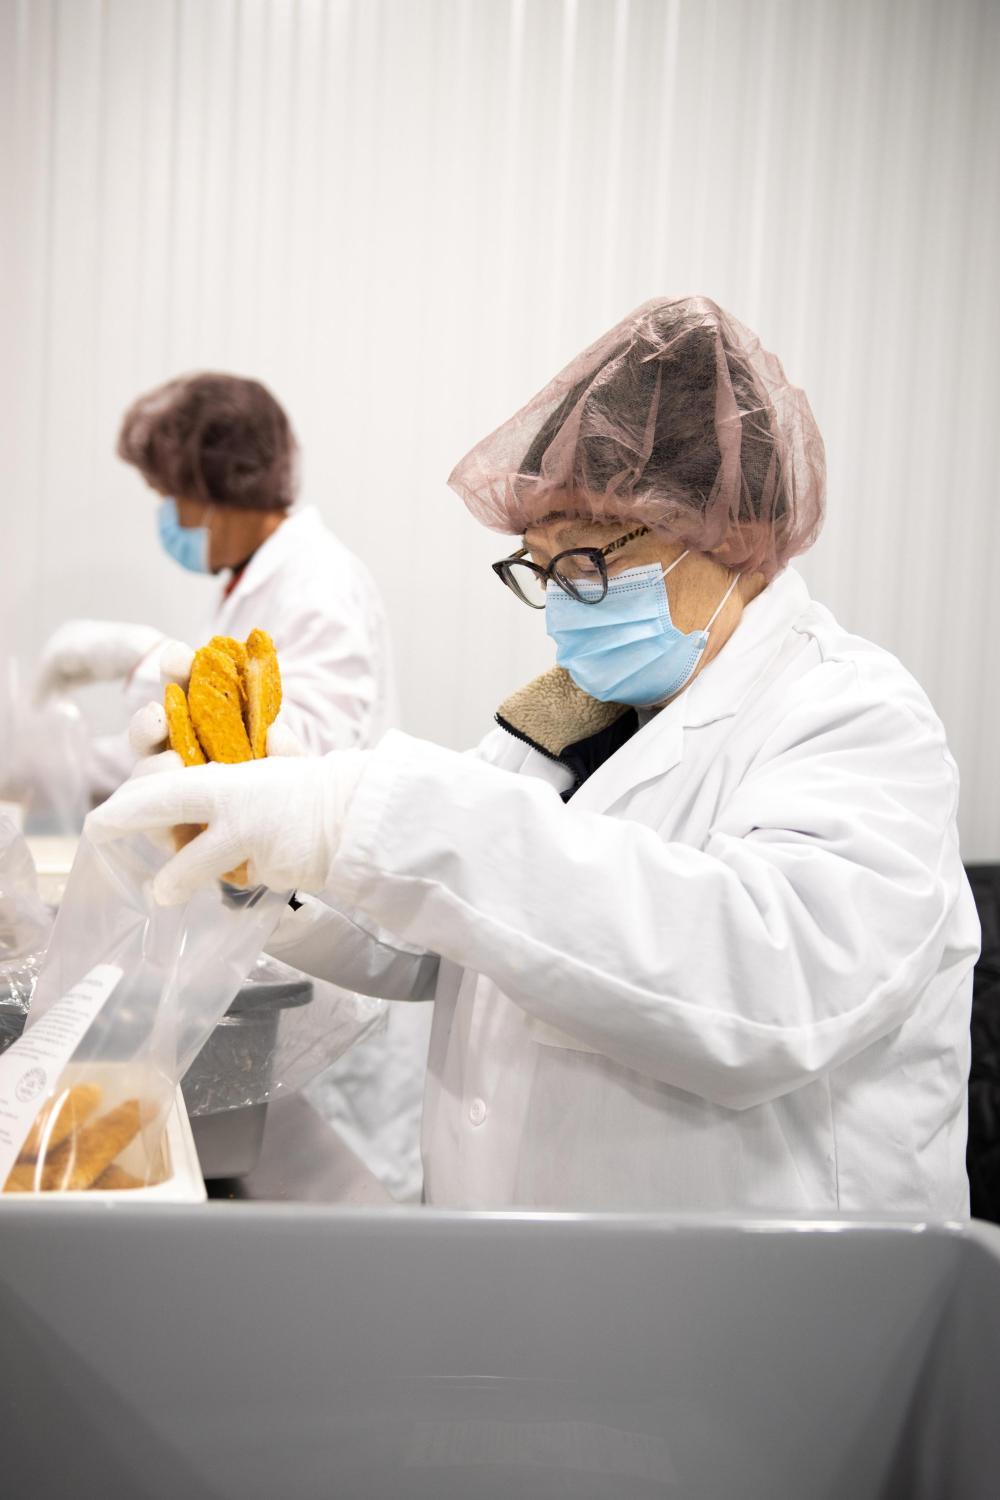 A volunteer wearing a hair net and coat packs frozen chicken in a plastic bag 